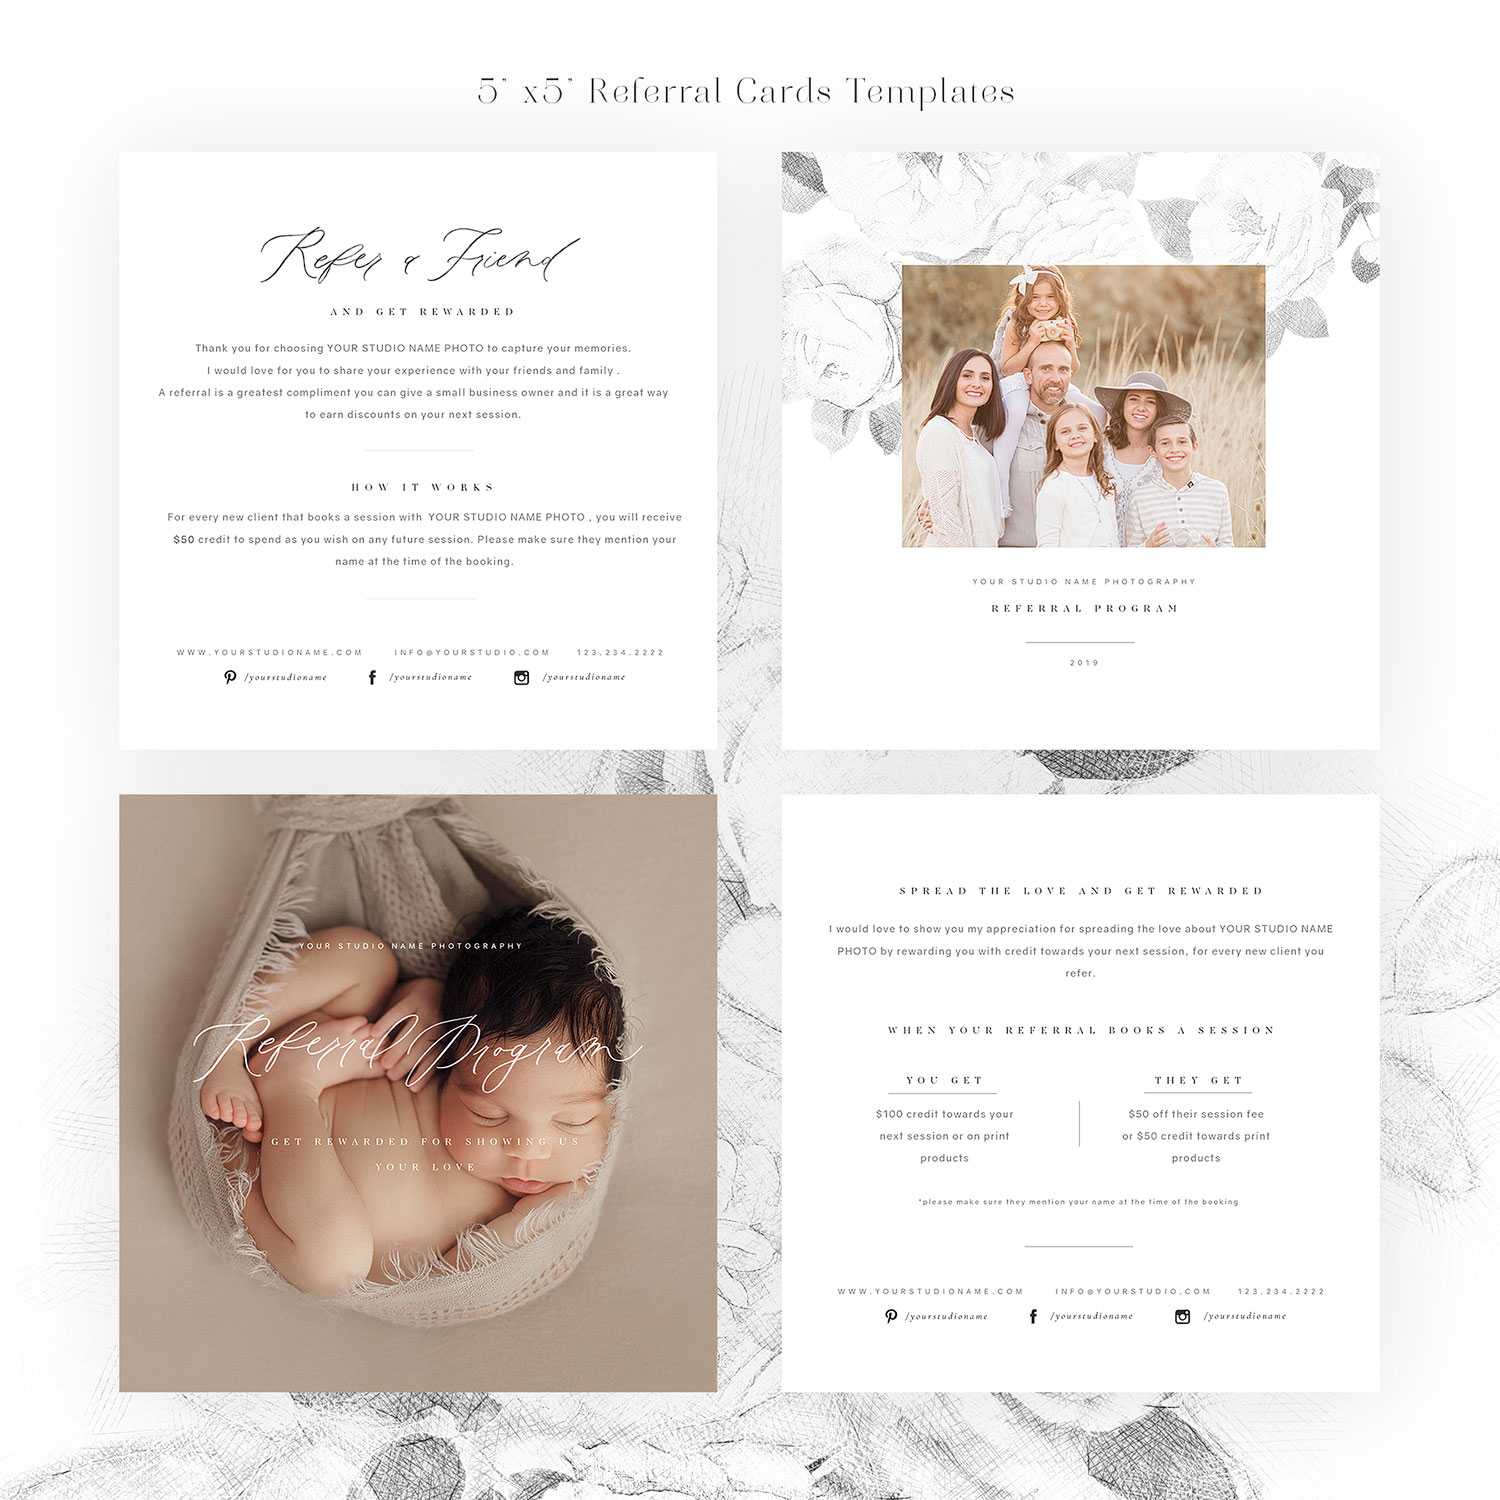 Referral Love 5×5 Card Templates In Photography Referral Card Templates